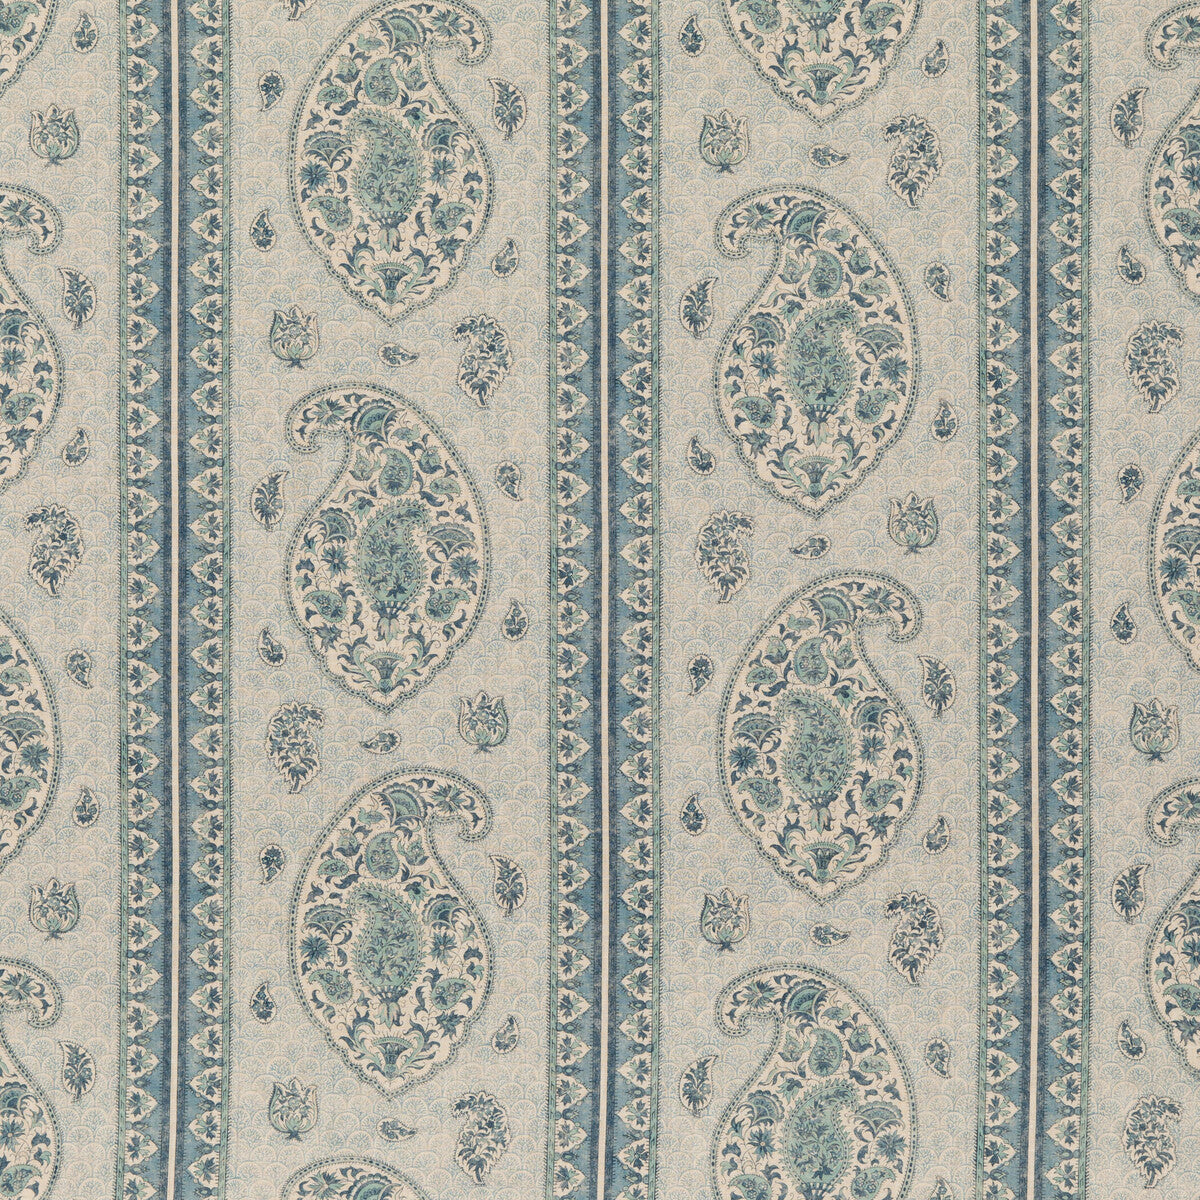 Coromandel fabric in blue color - pattern BP10831.3.0 - by G P &amp; J Baker in the Coromandel collection